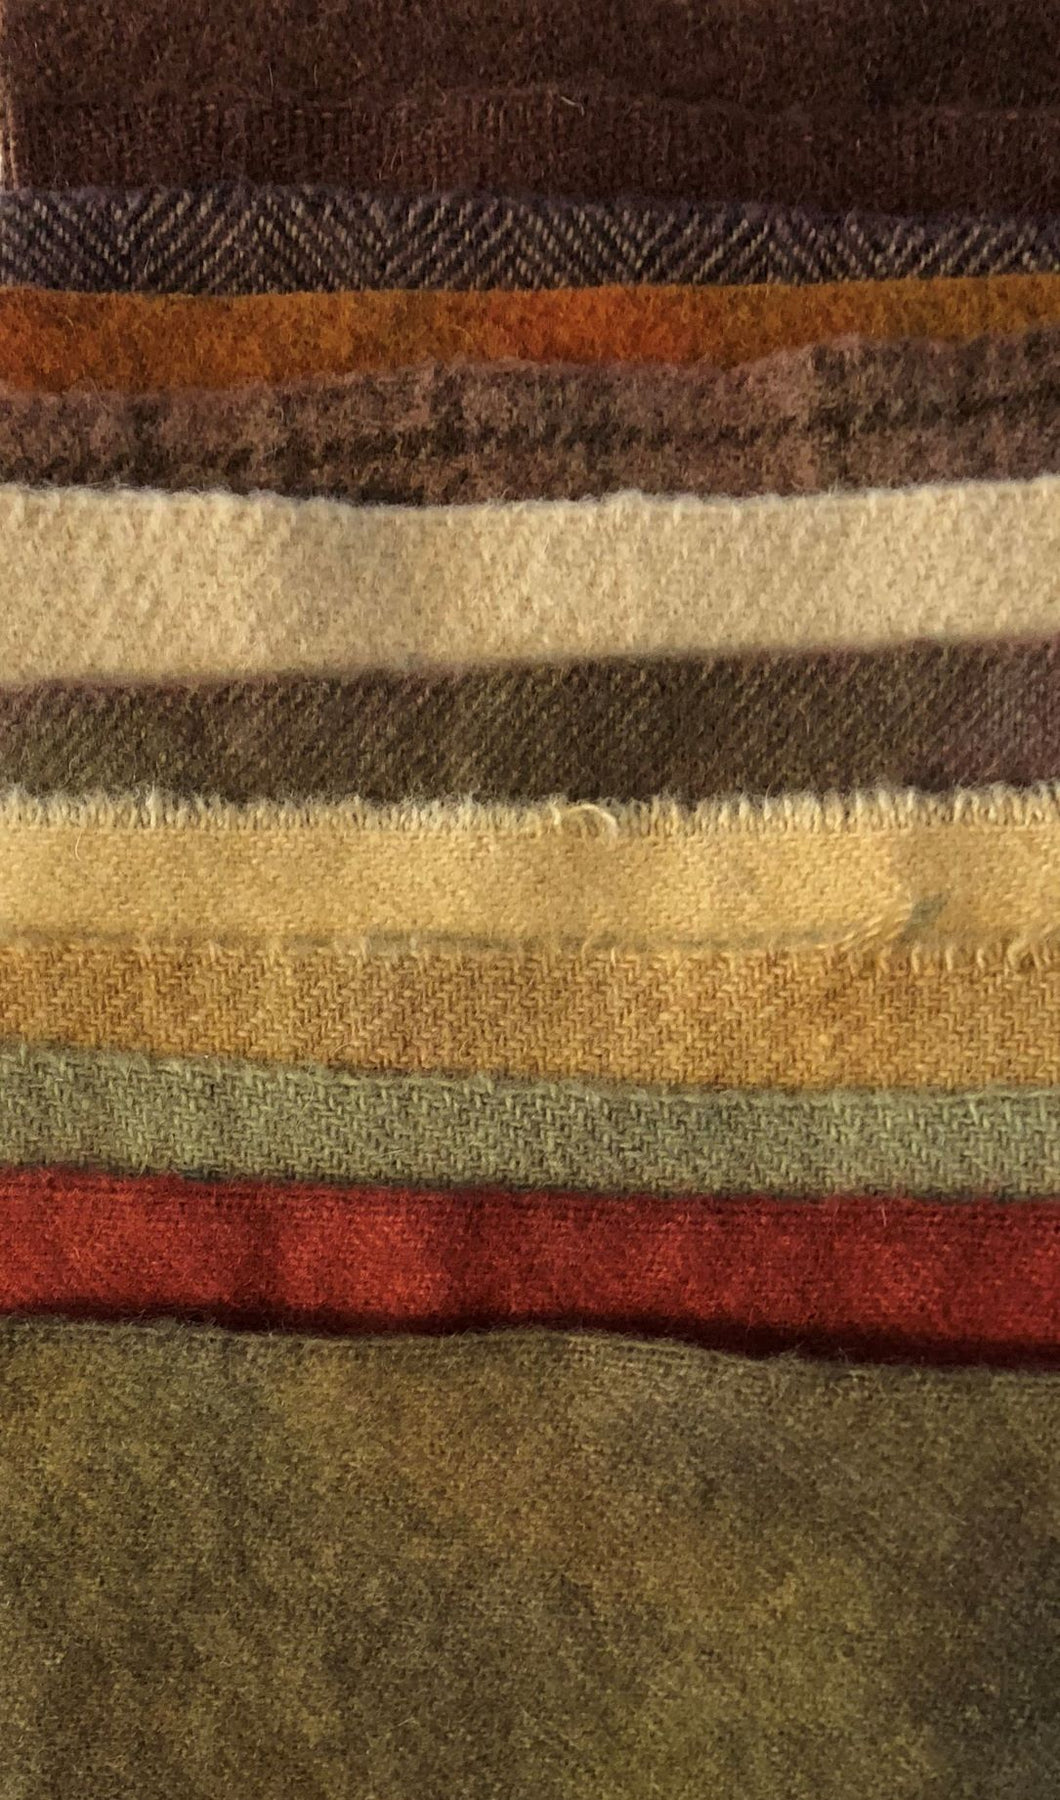 Twelve different 5" wool squares in tans and browns